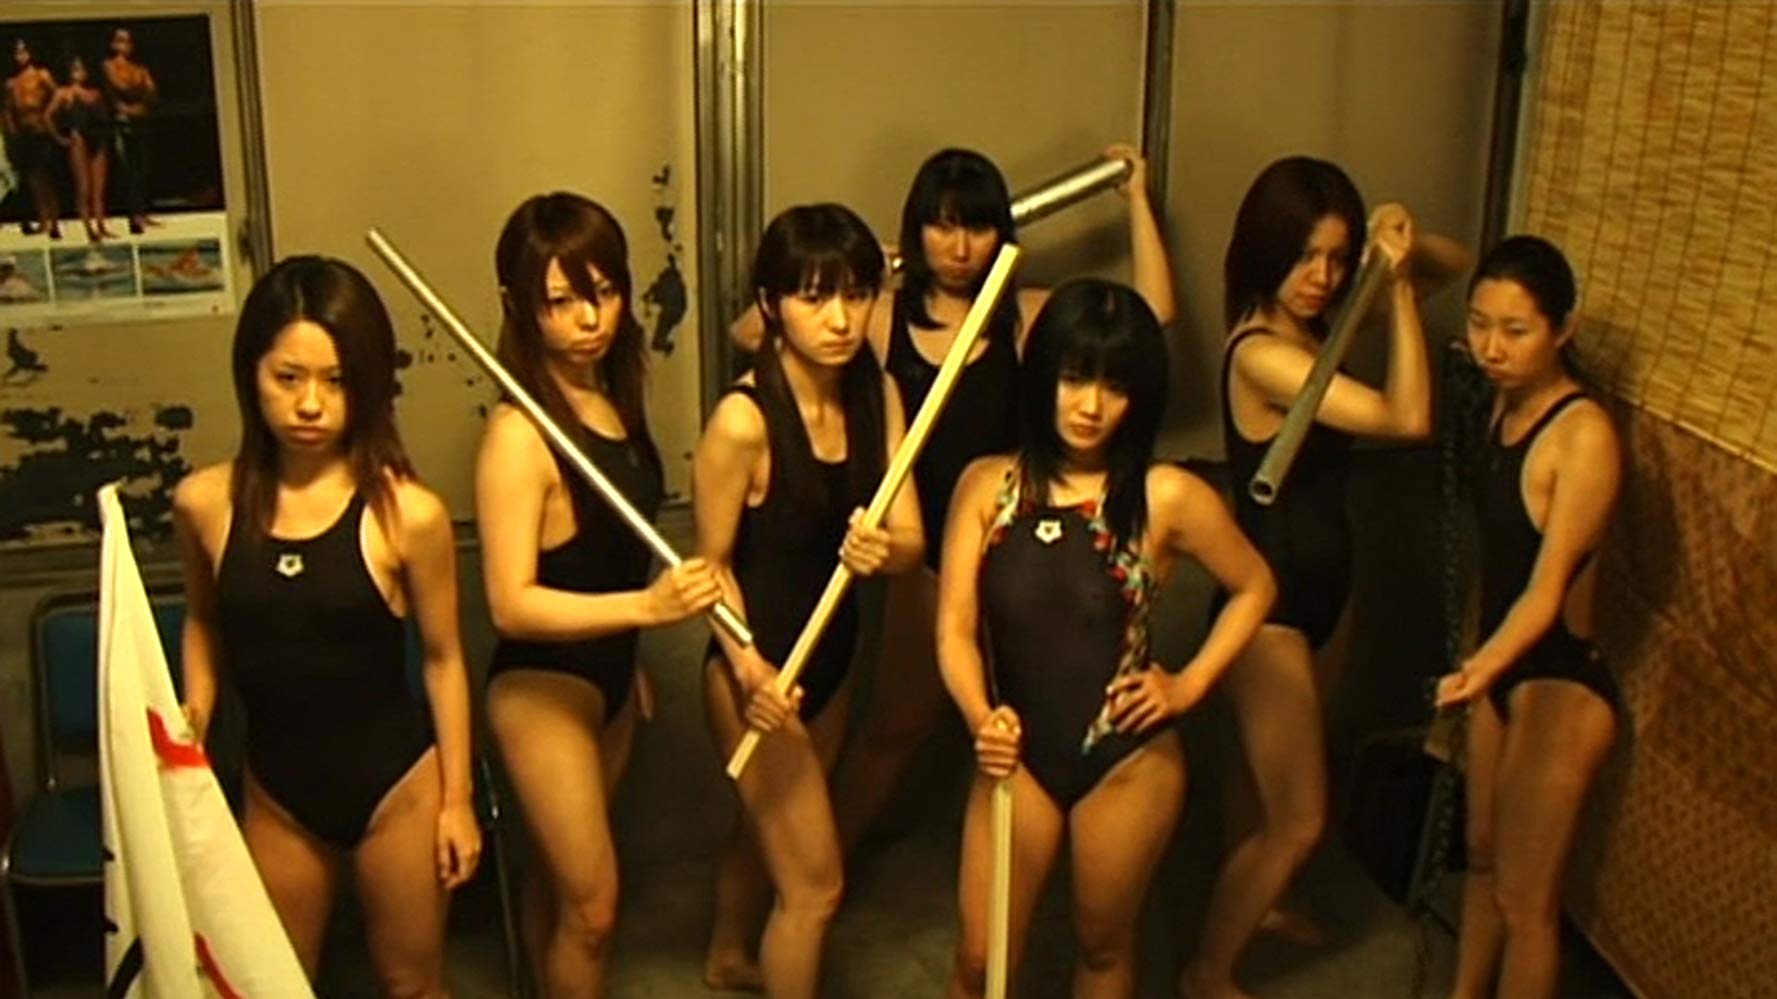 The girls swim team ready for the fight against the zombies in Attack Girls Swim Team vs the Undead (2007)